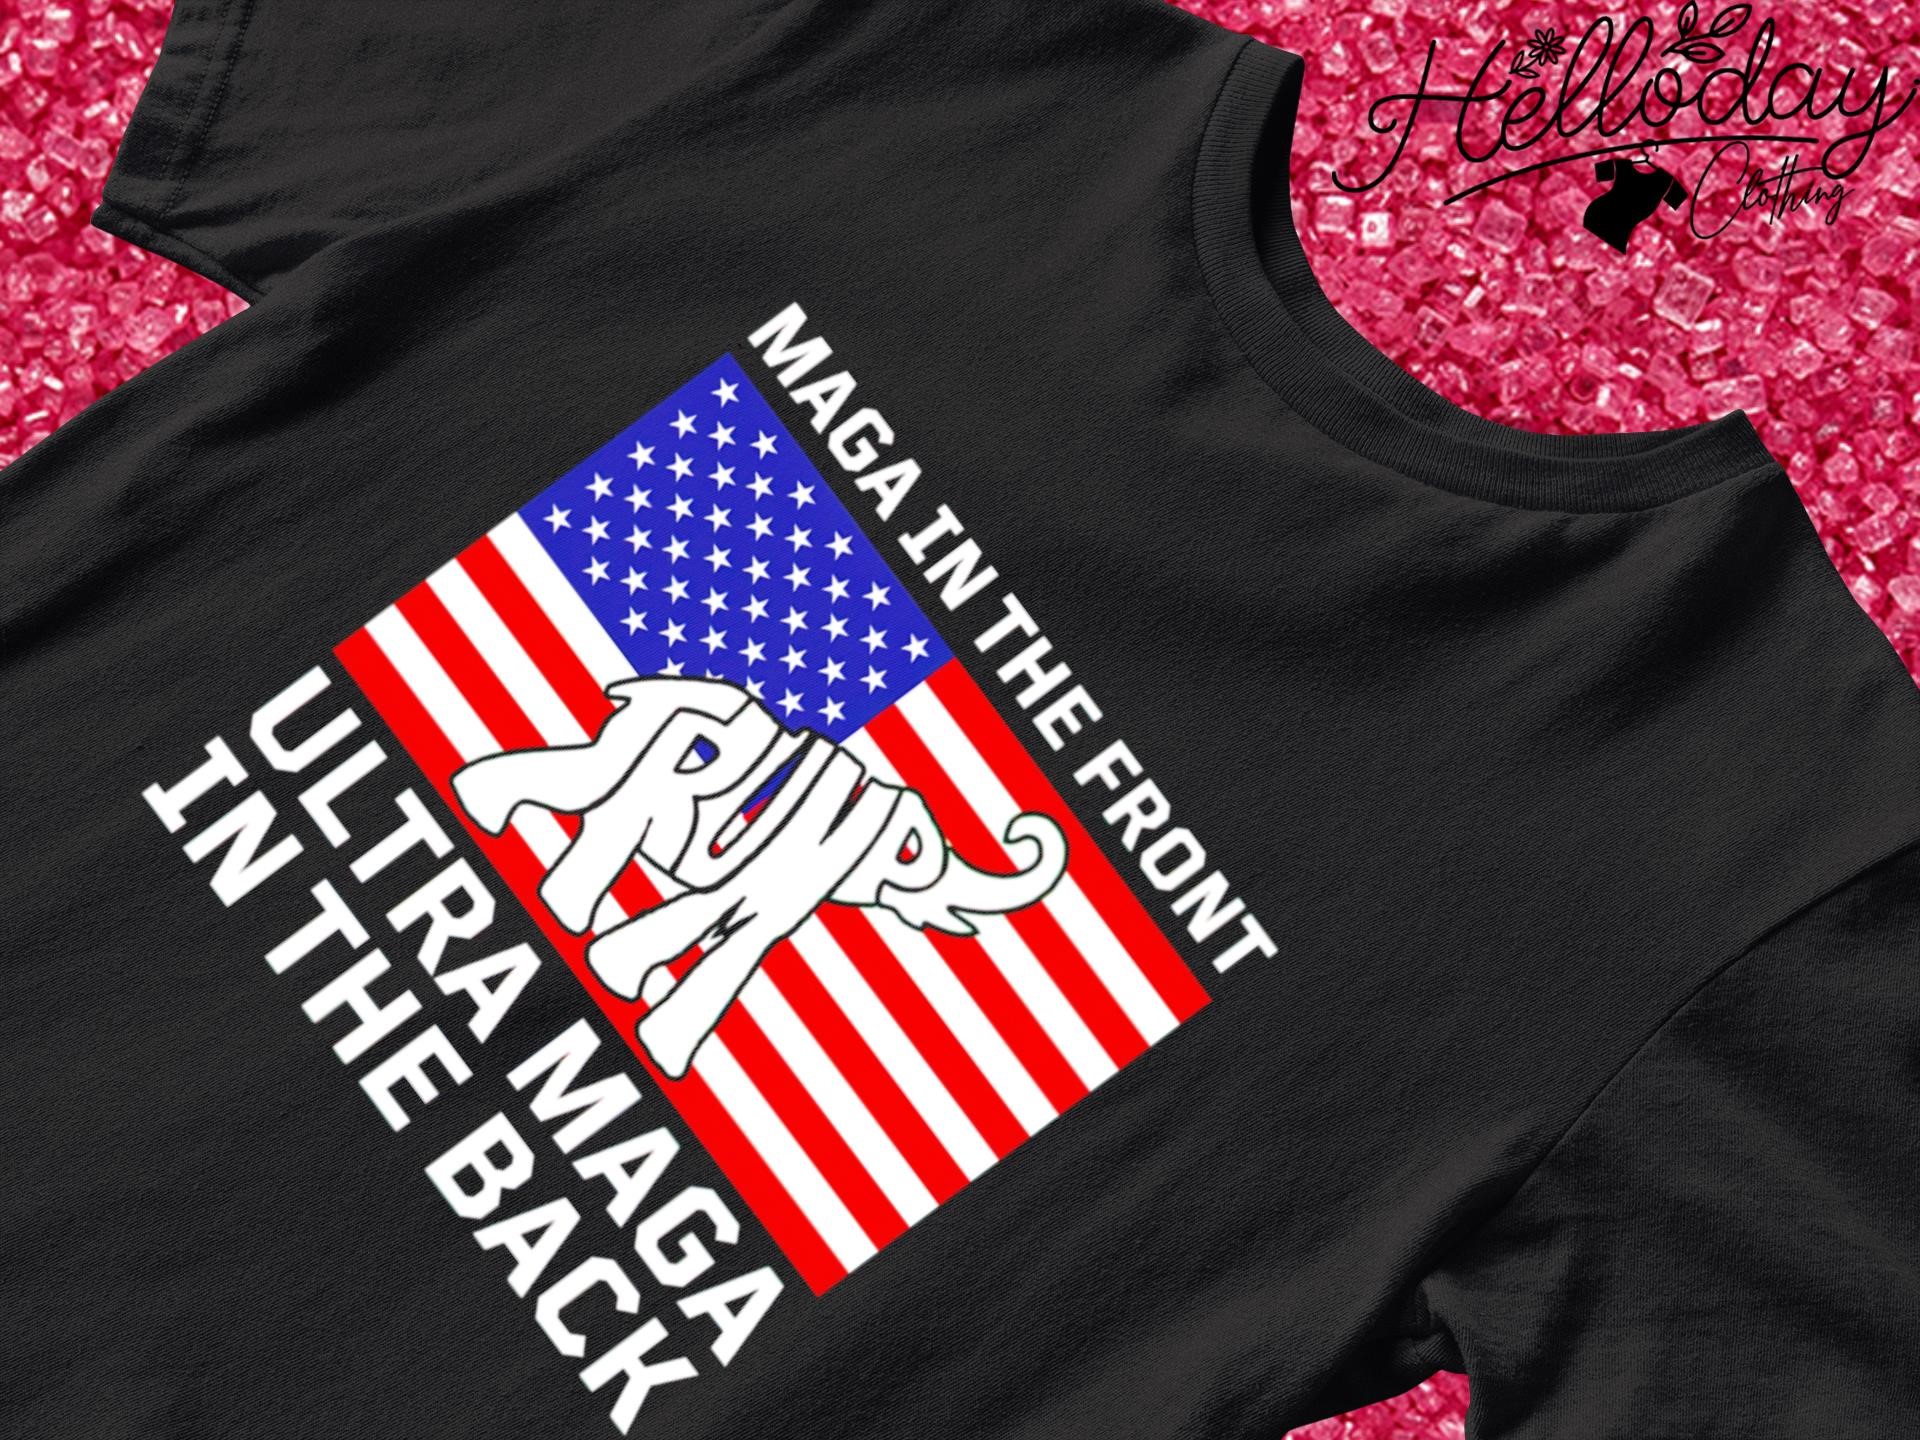 Elephant Trump maga in the front ultra Maga in the back shirt